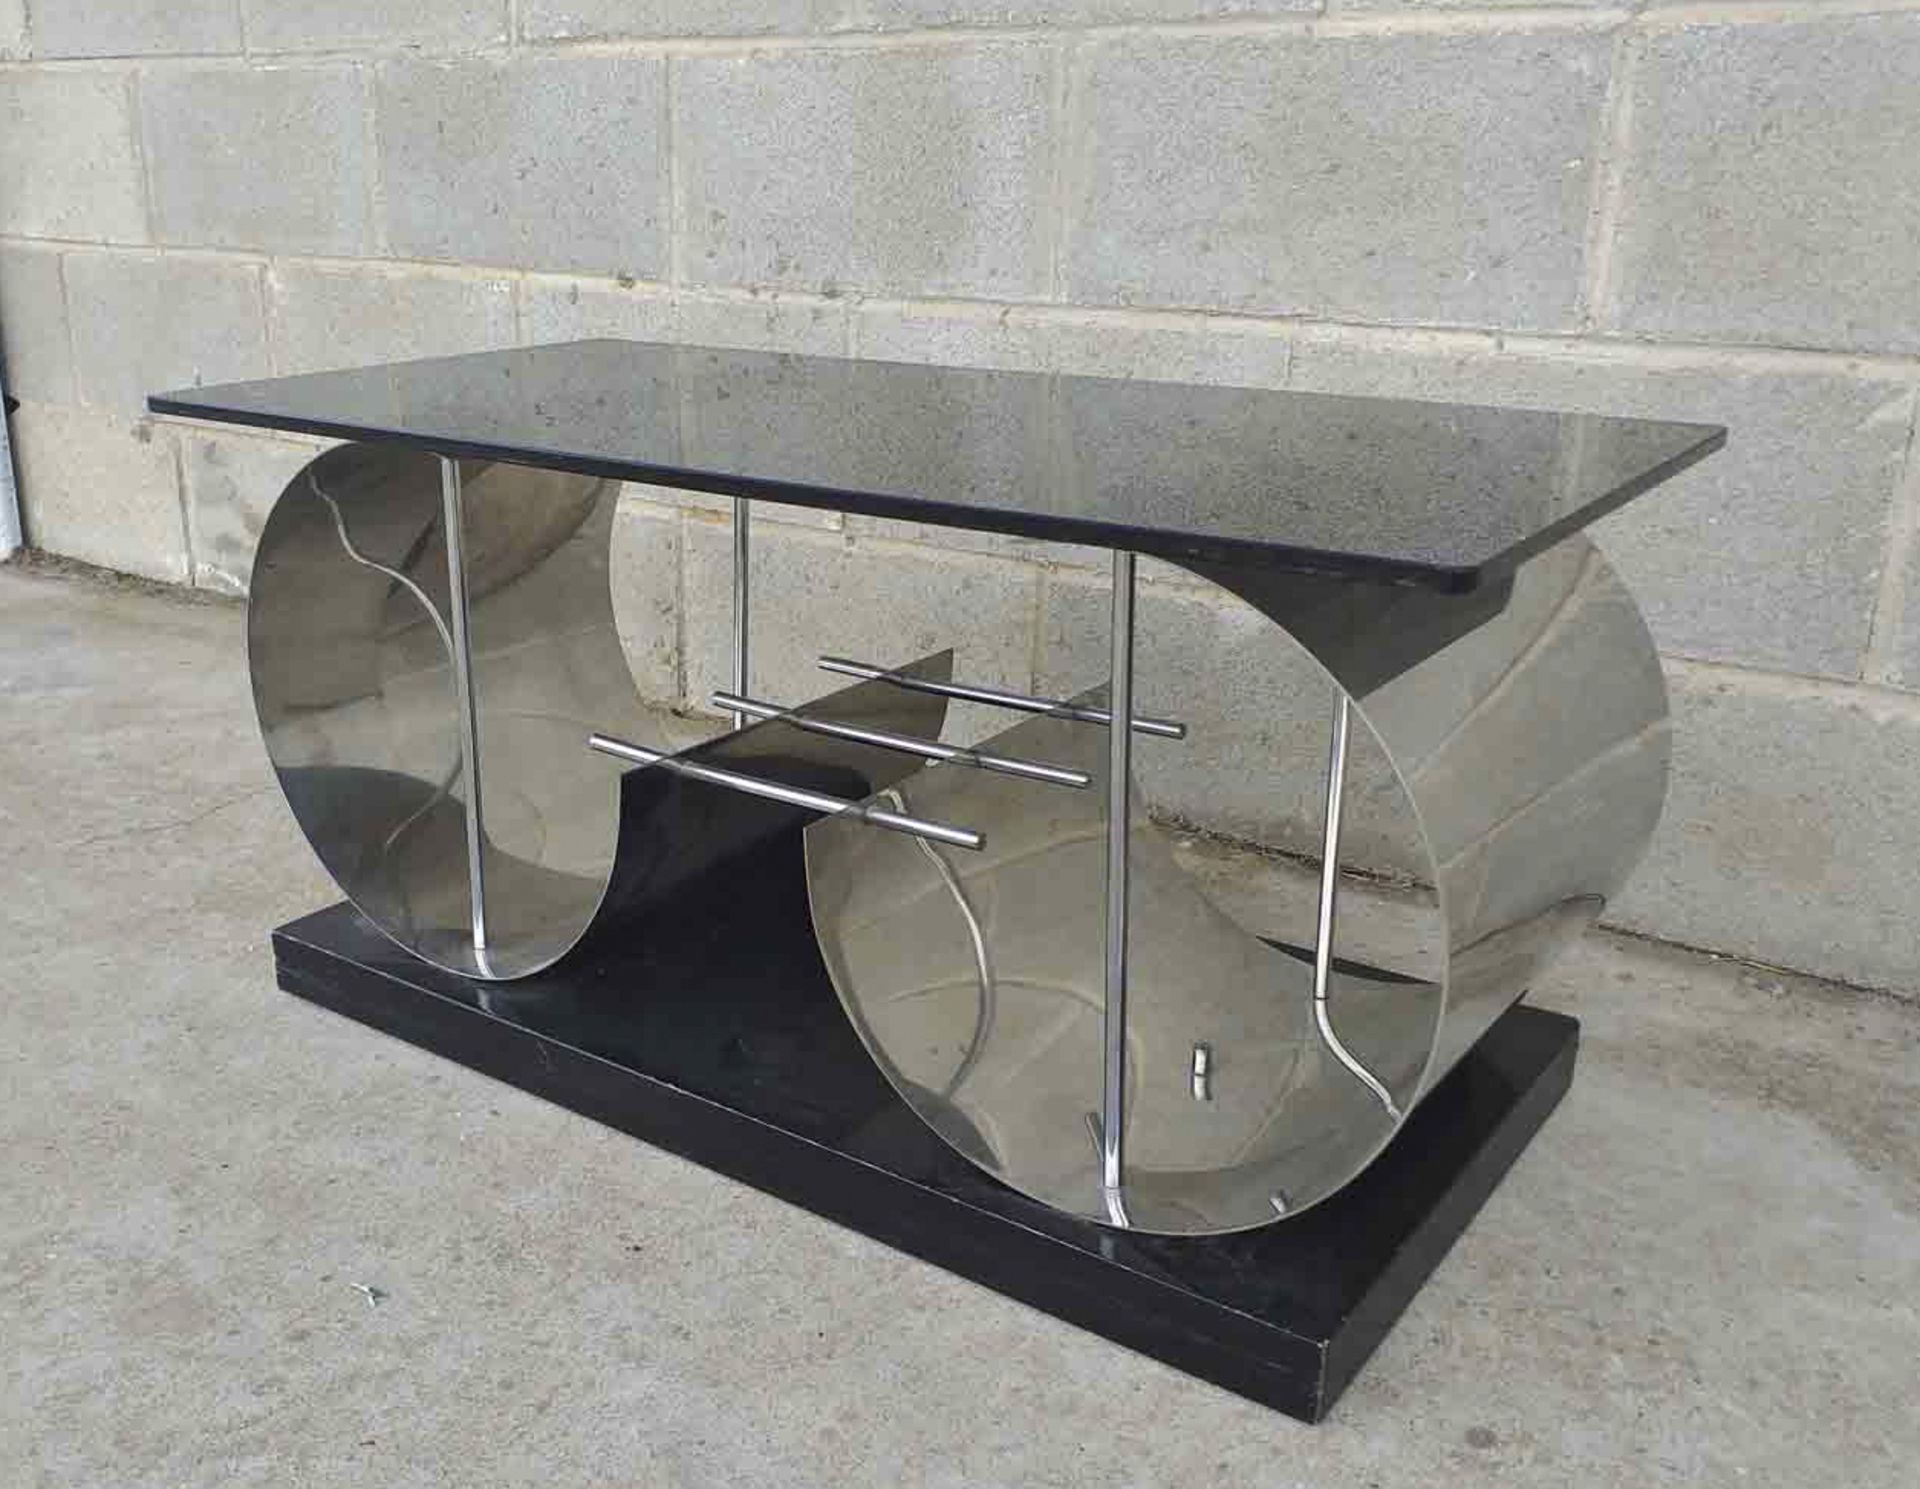 Important Italian Art Deco sideboard table in black marble and polished steel, 1950s - 1960s - Image 2 of 4